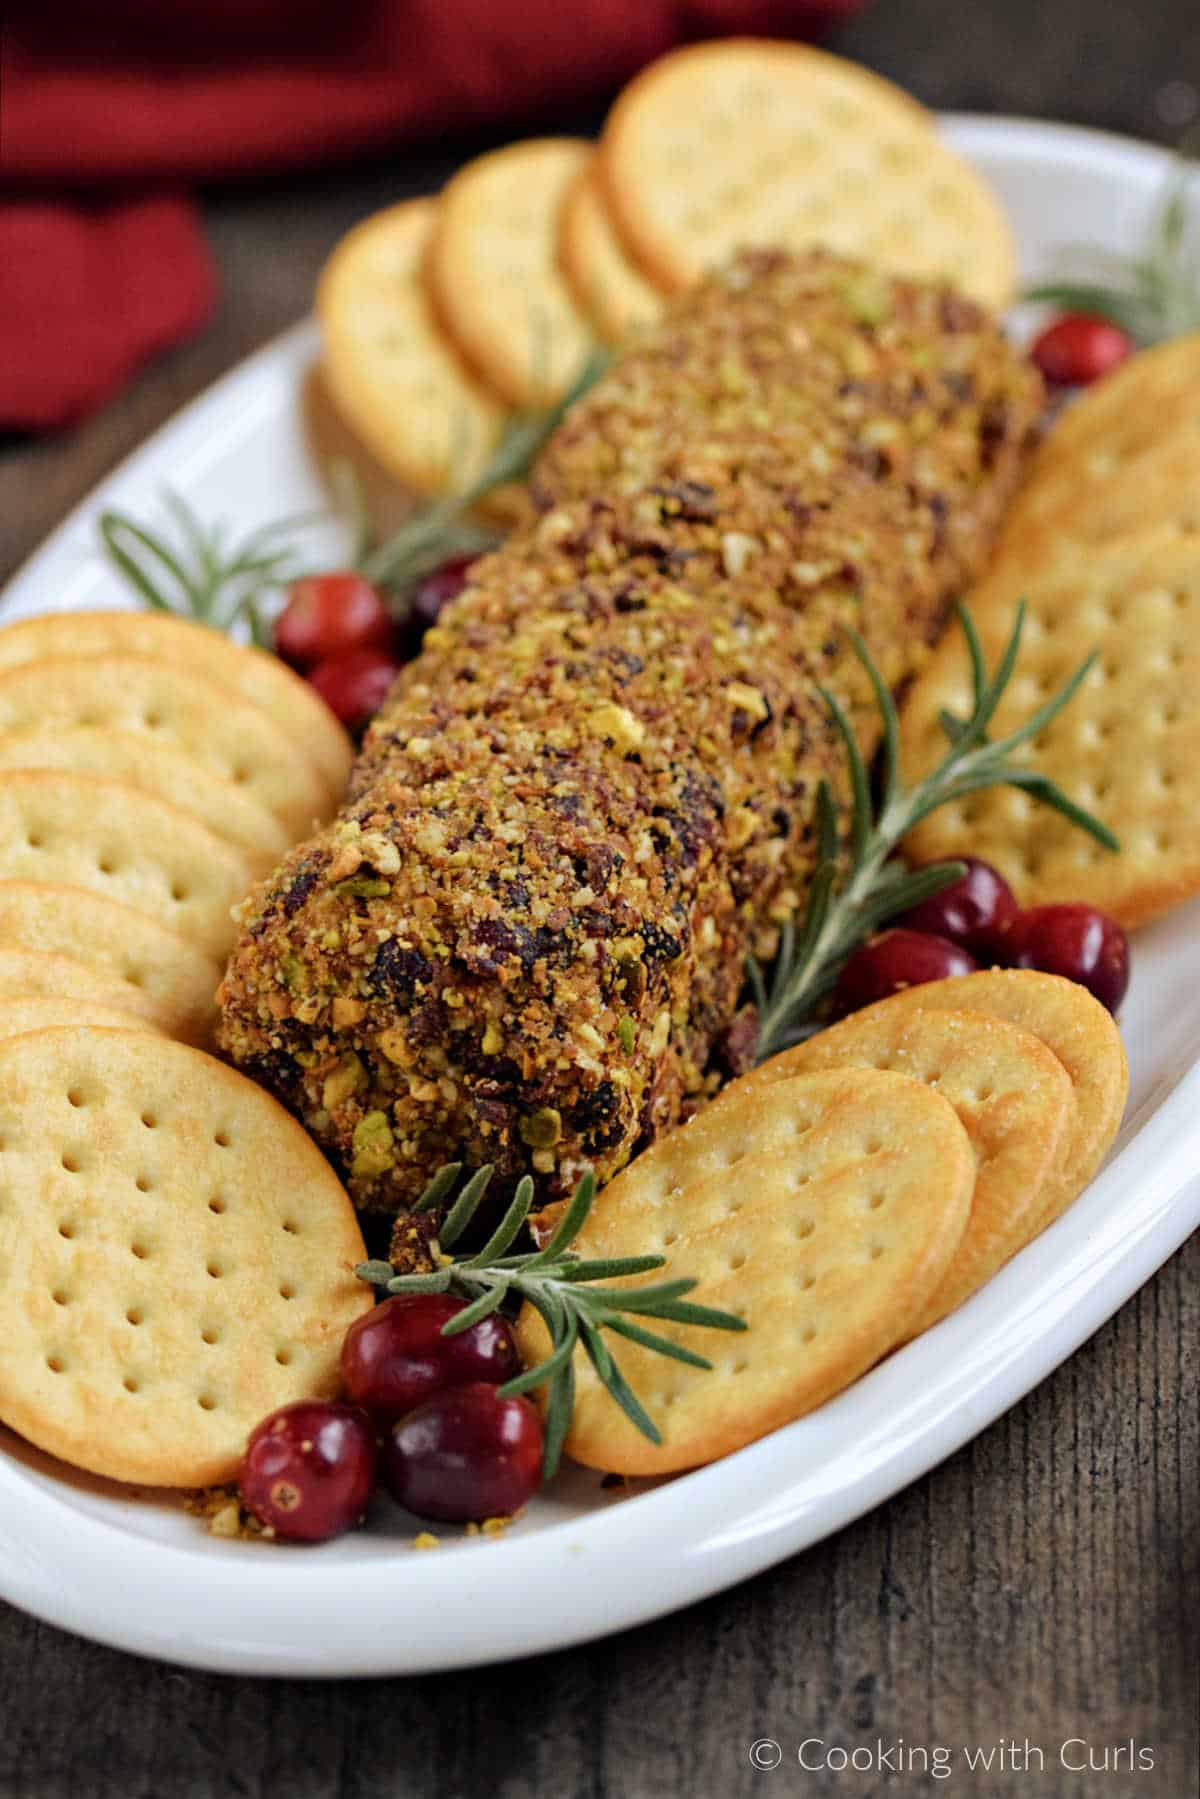 Cranberry pecan goat cheese log on a plate with assorted crackers.